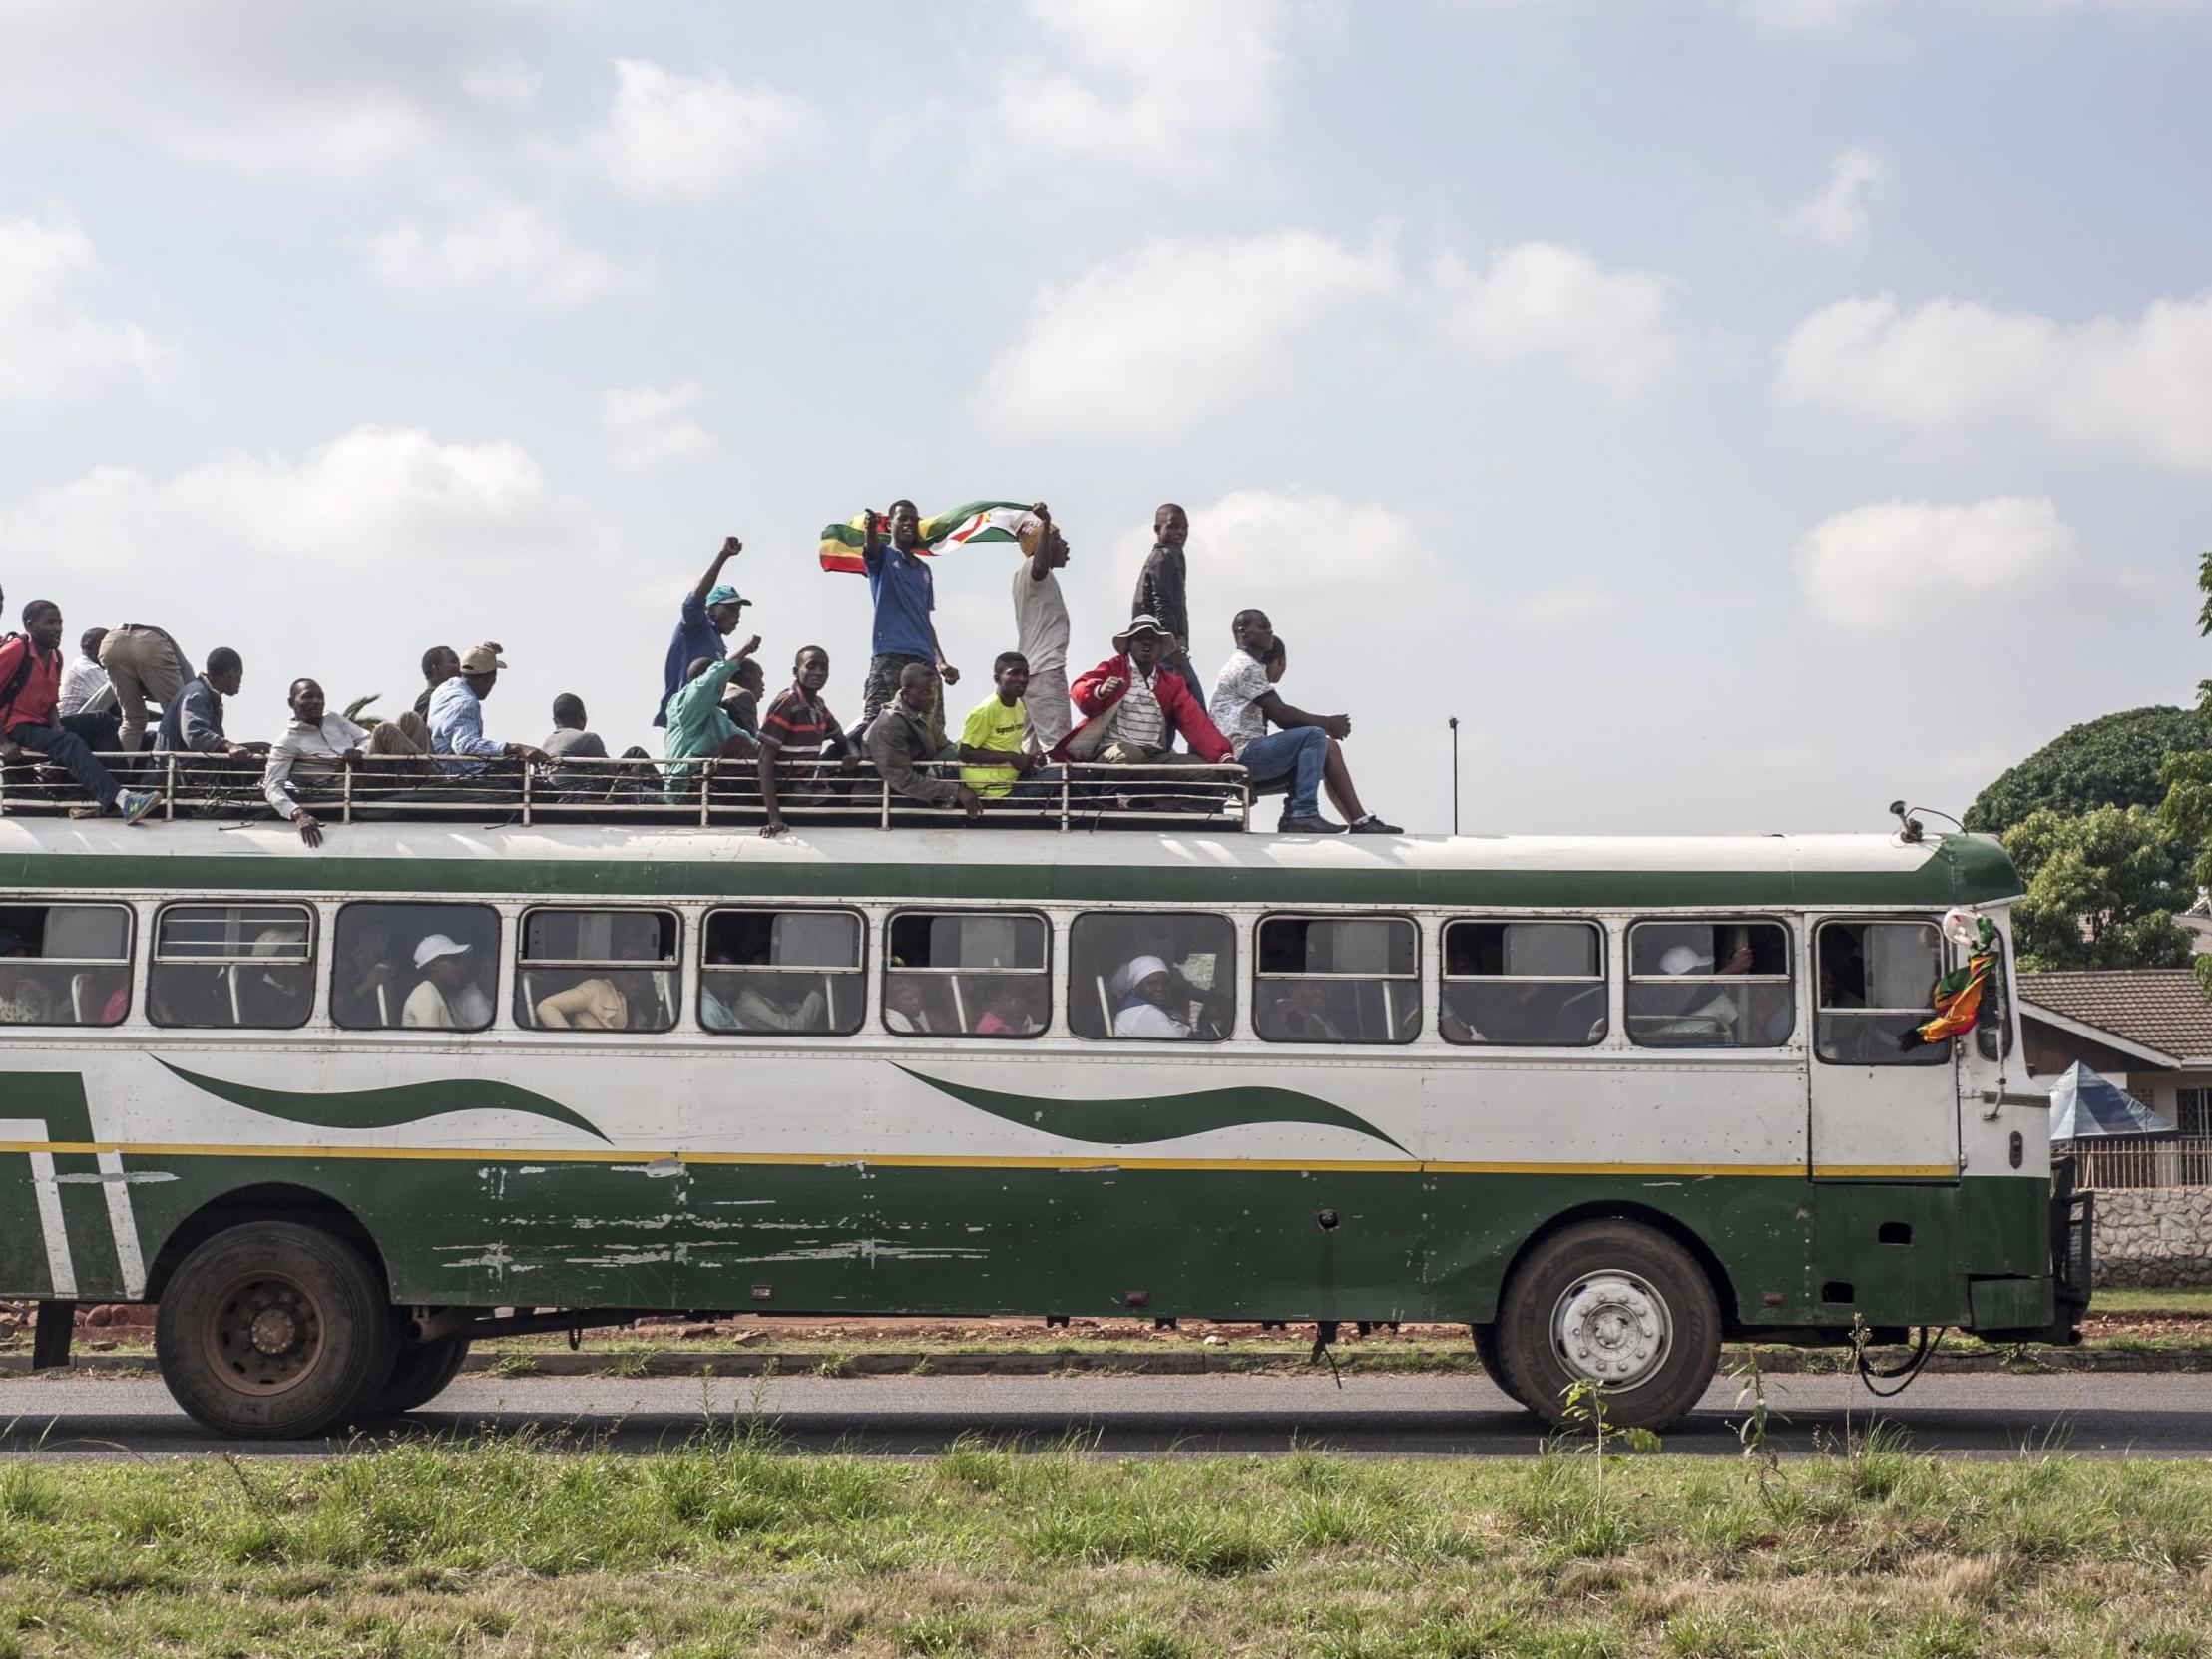 File image of a bus in Zimbabwe. Crashes are common due to poor infrastructure and speeding